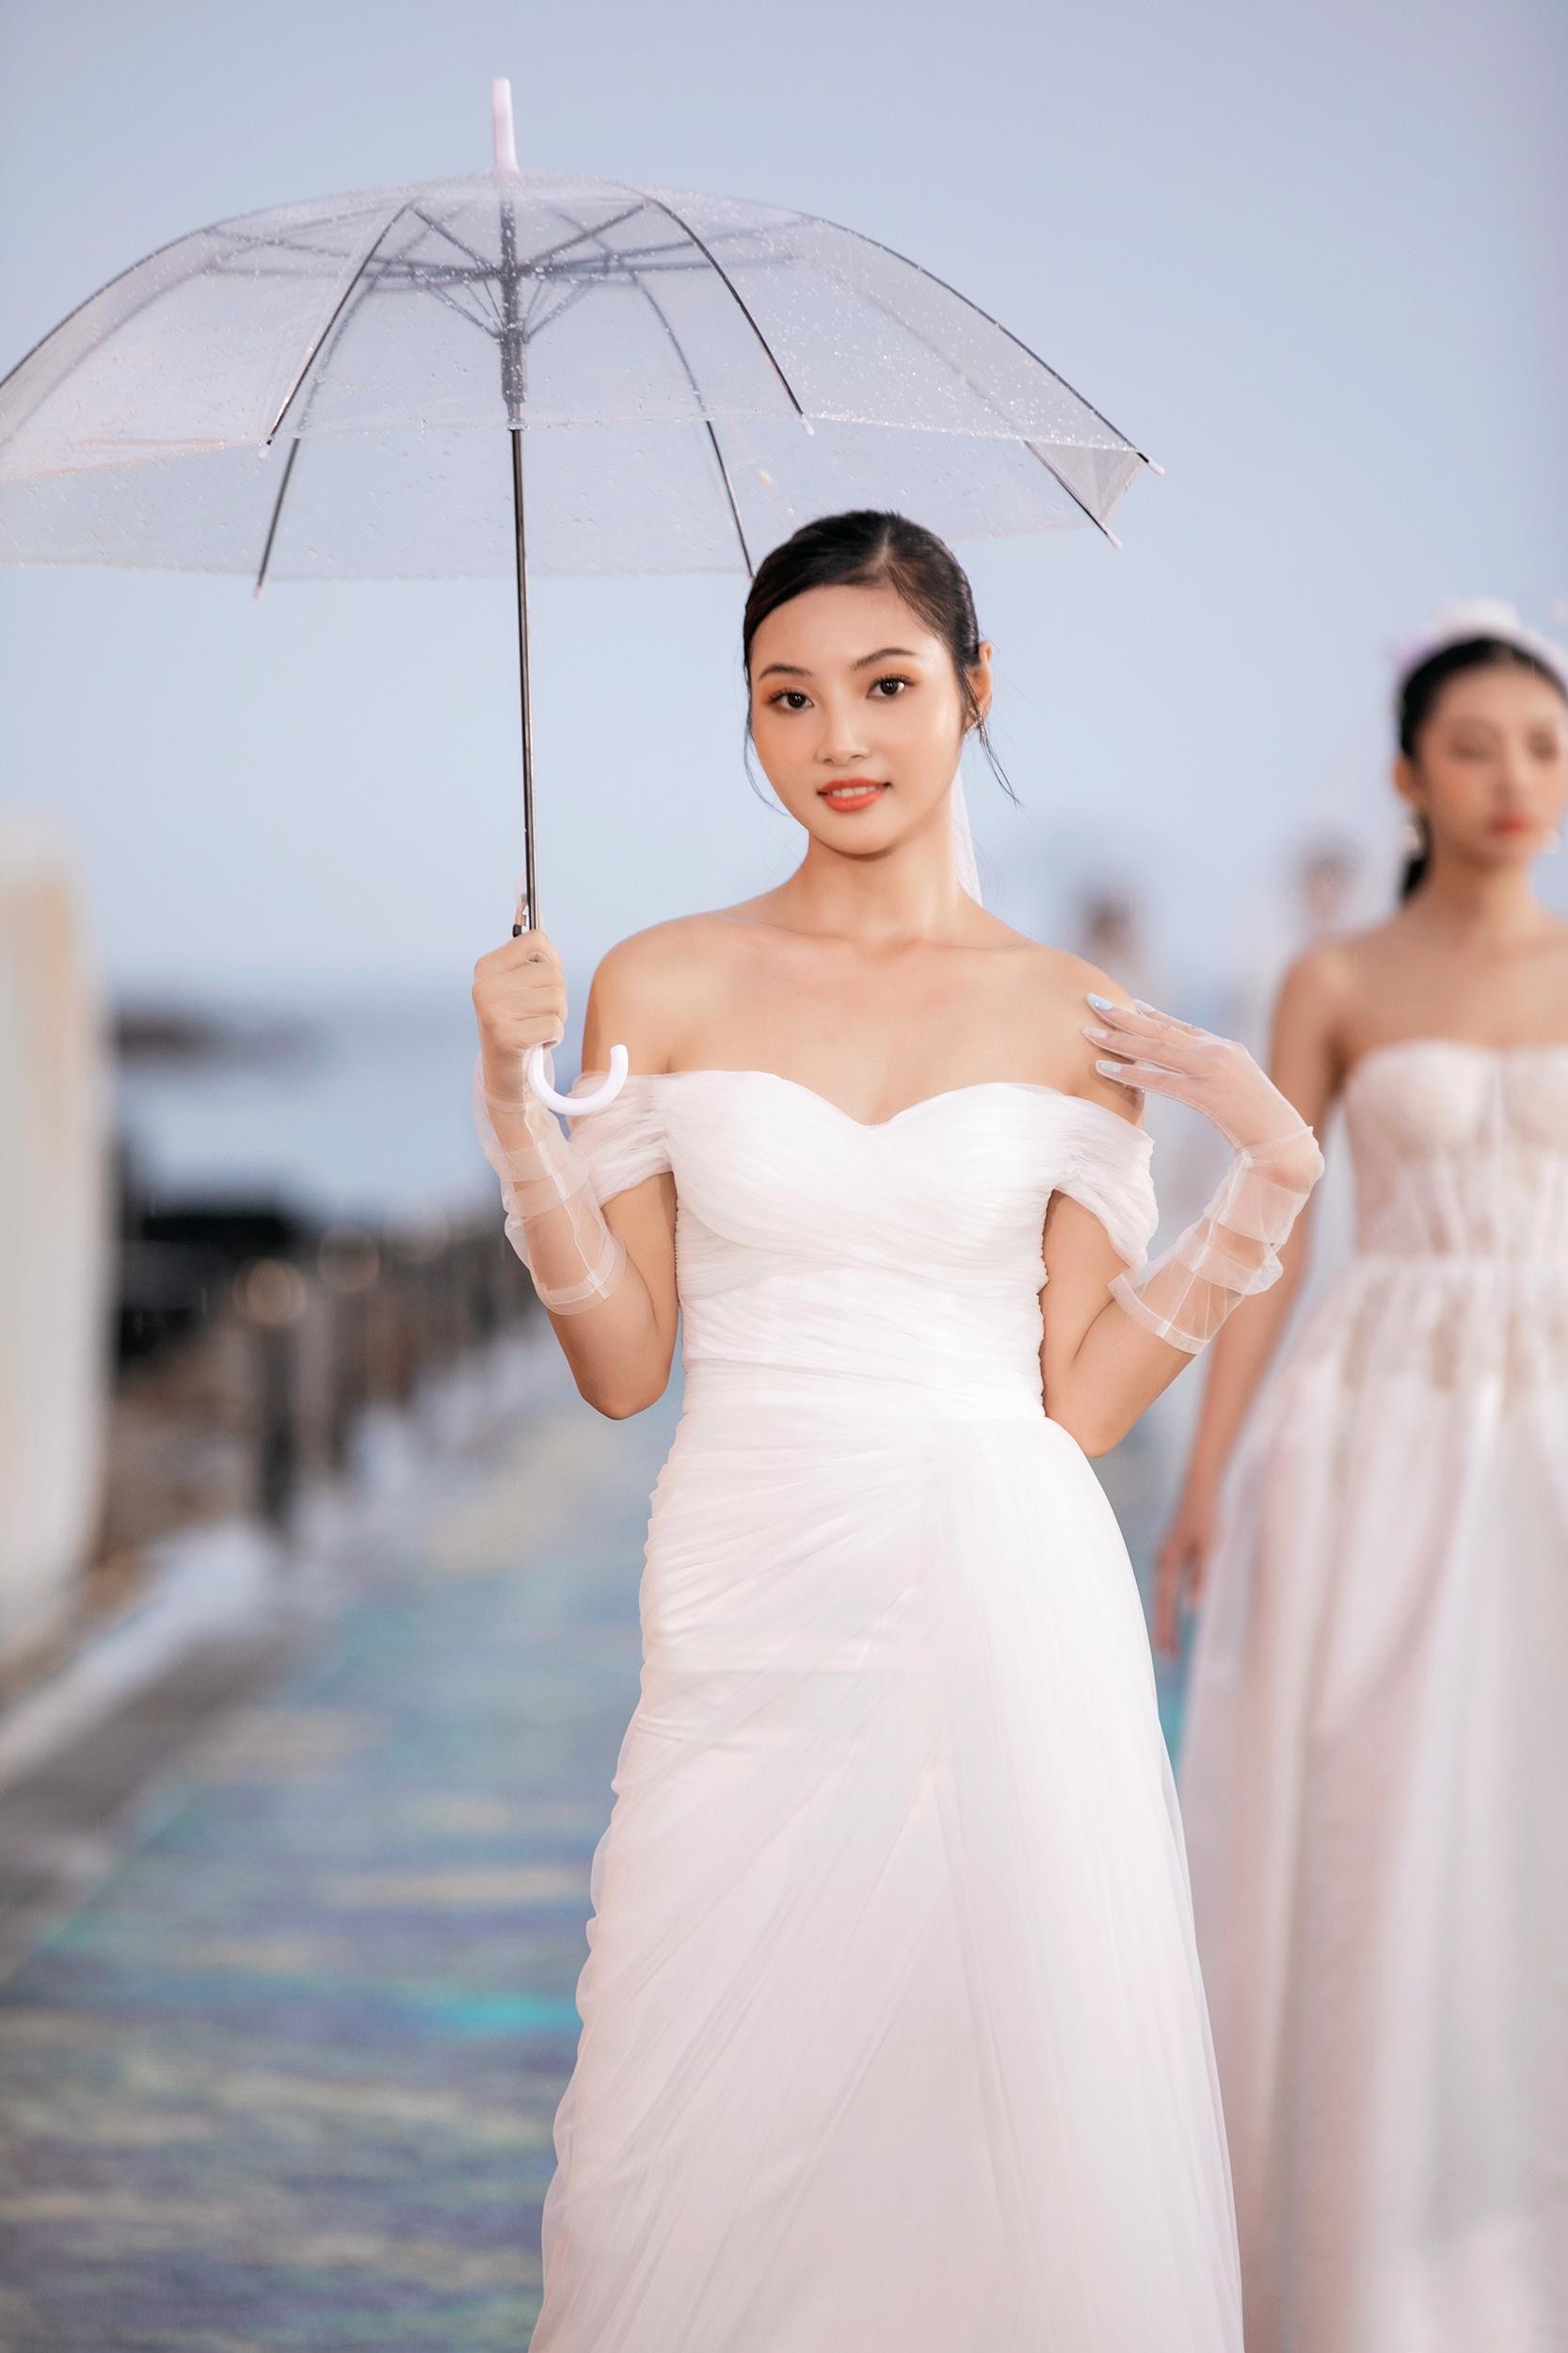 Miss Tieu Vy - Runner-up Phuong Anh transforms into a charming bride, competing in the catwalk in the rain - Photo 18.